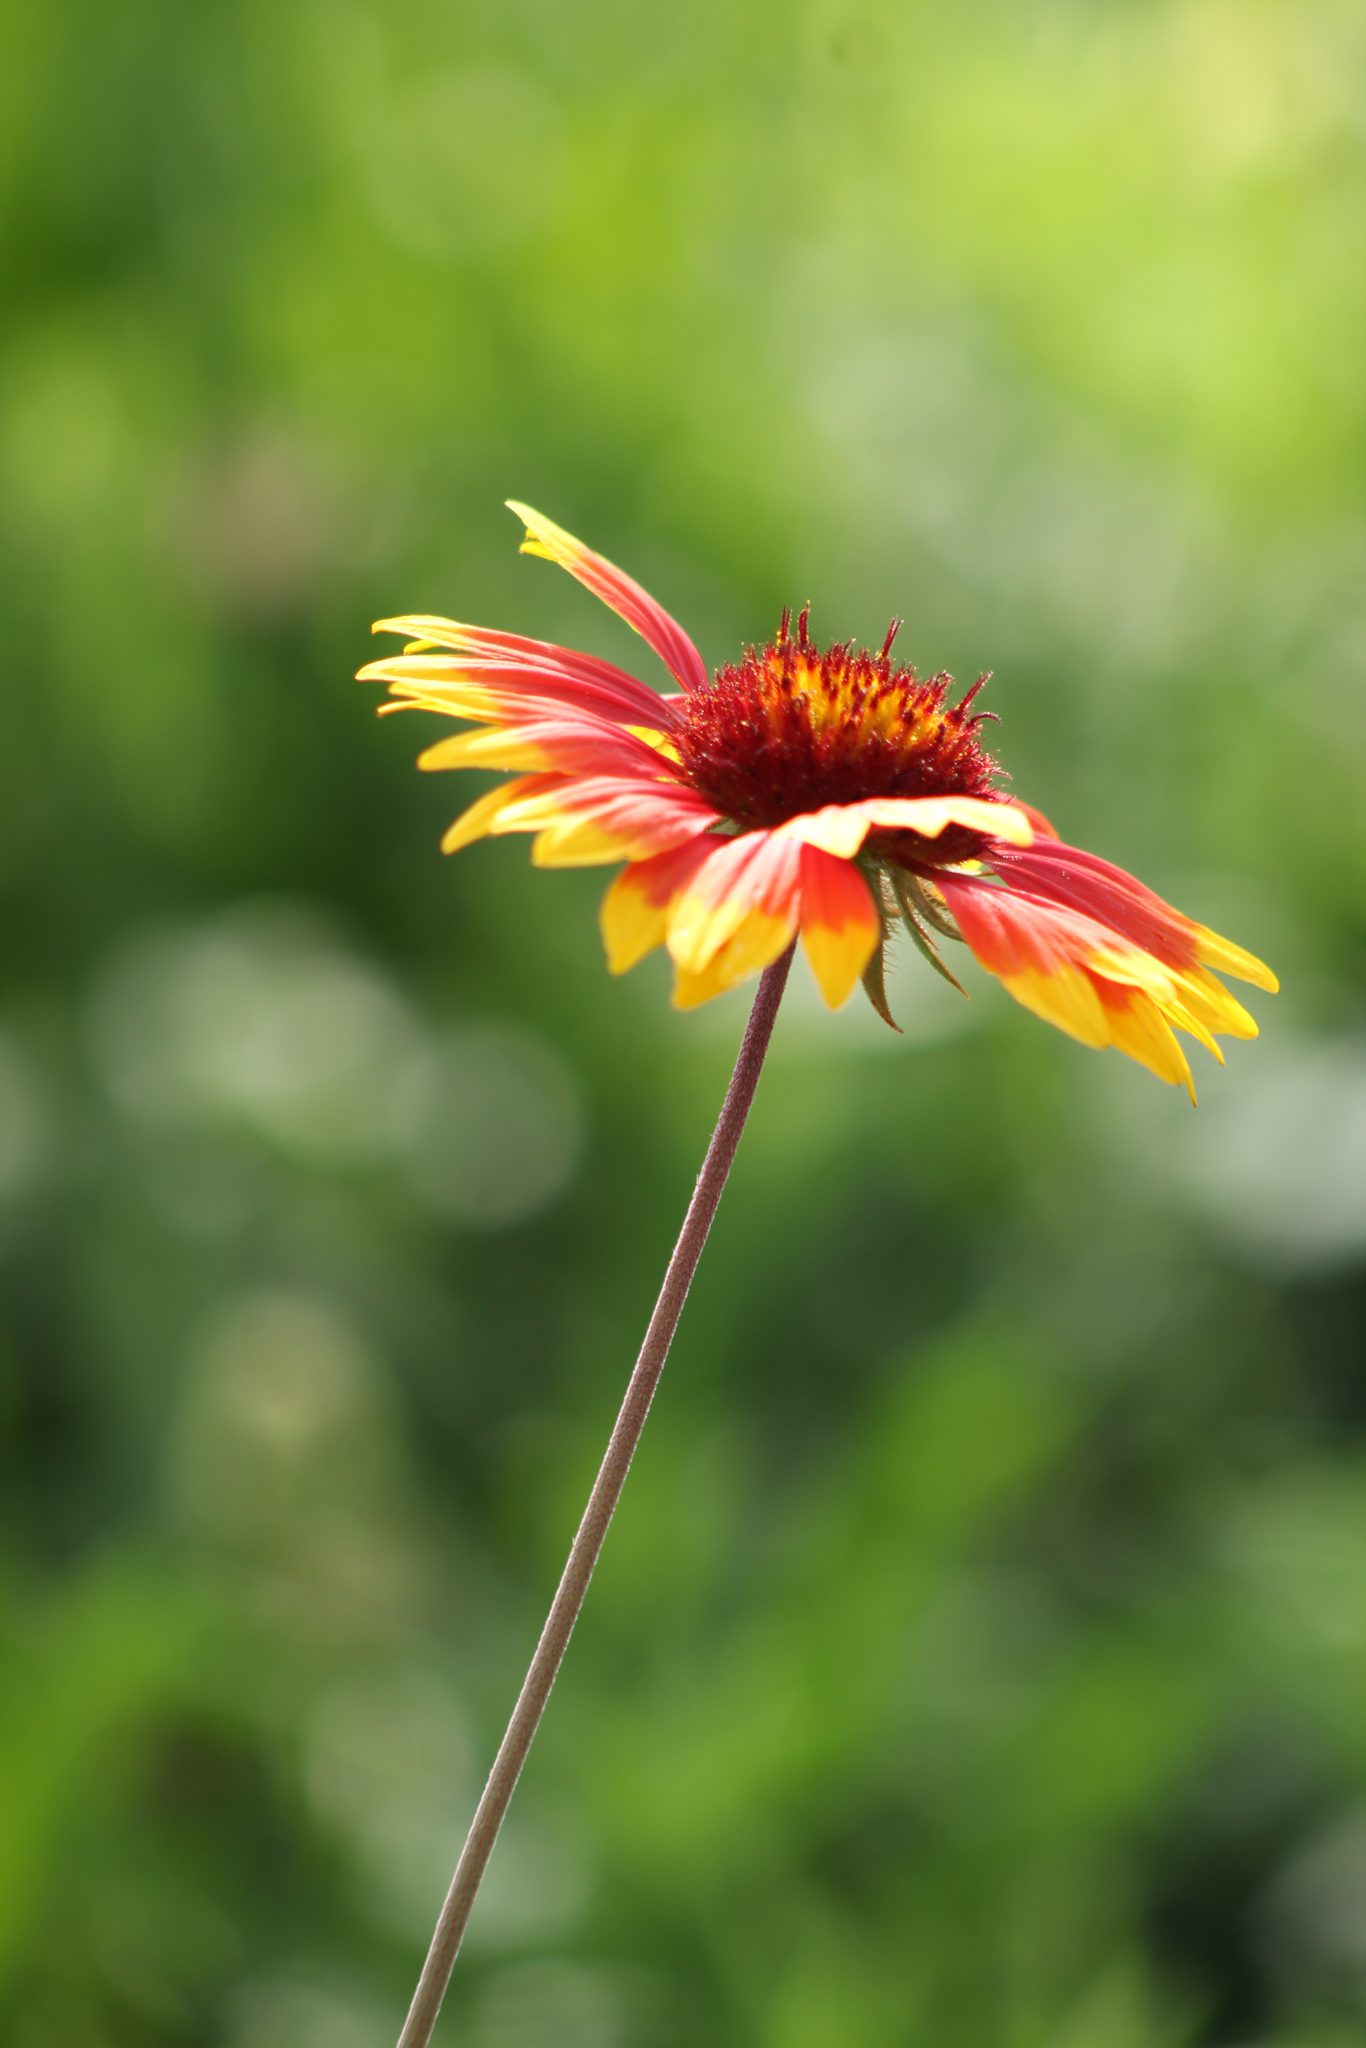 Red and yellow flower in sunlight. Bokeh photography